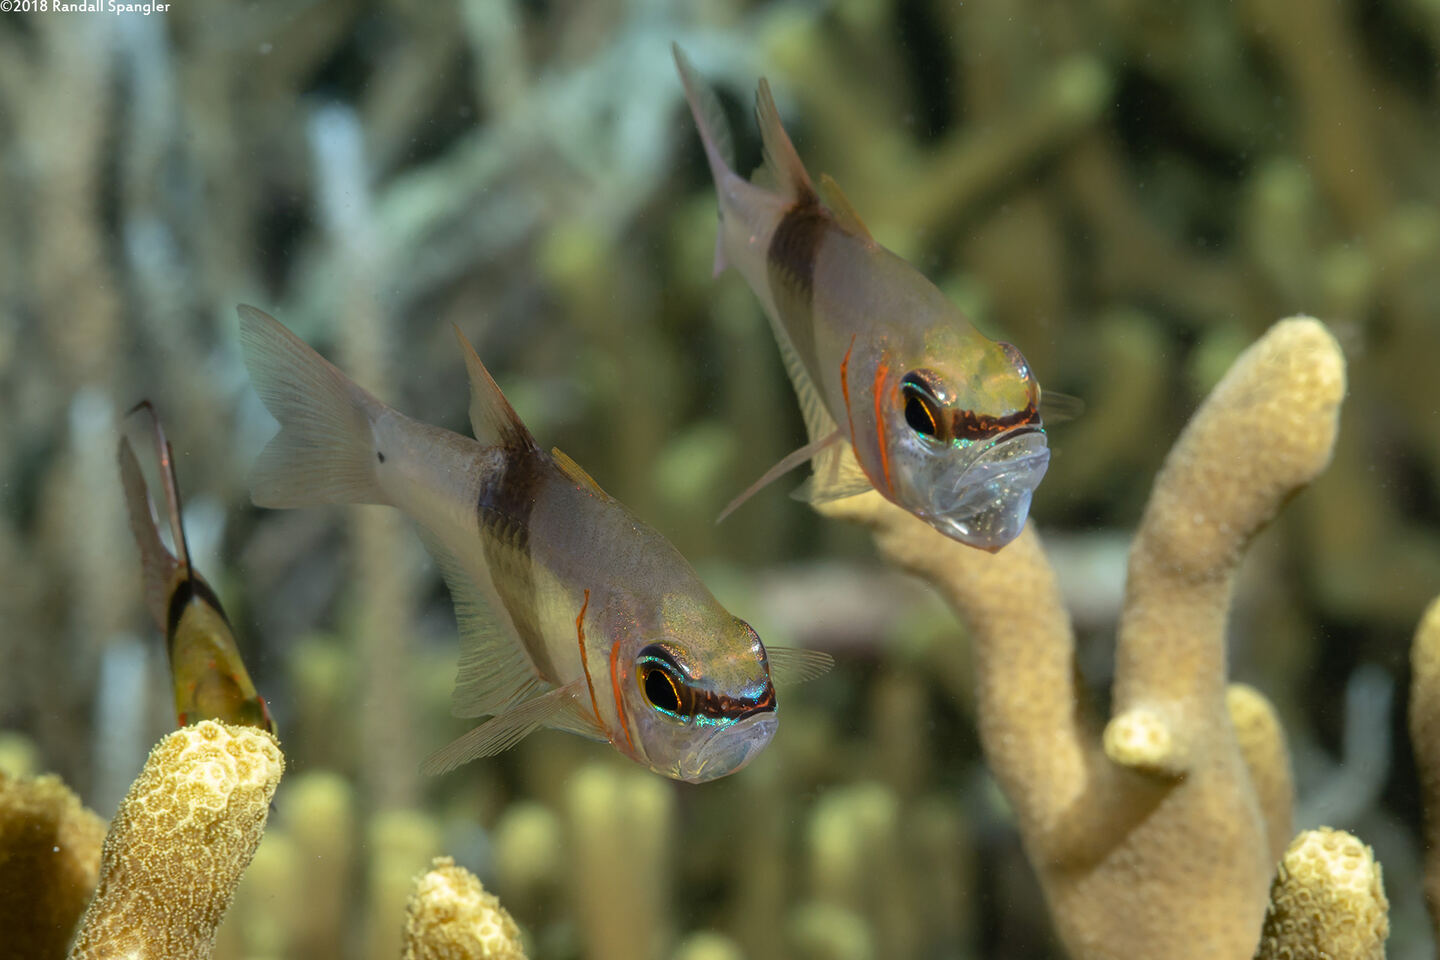 Taeniamia zosterophora (Girdled Cardinalfish); The right one has eggs in its mouth